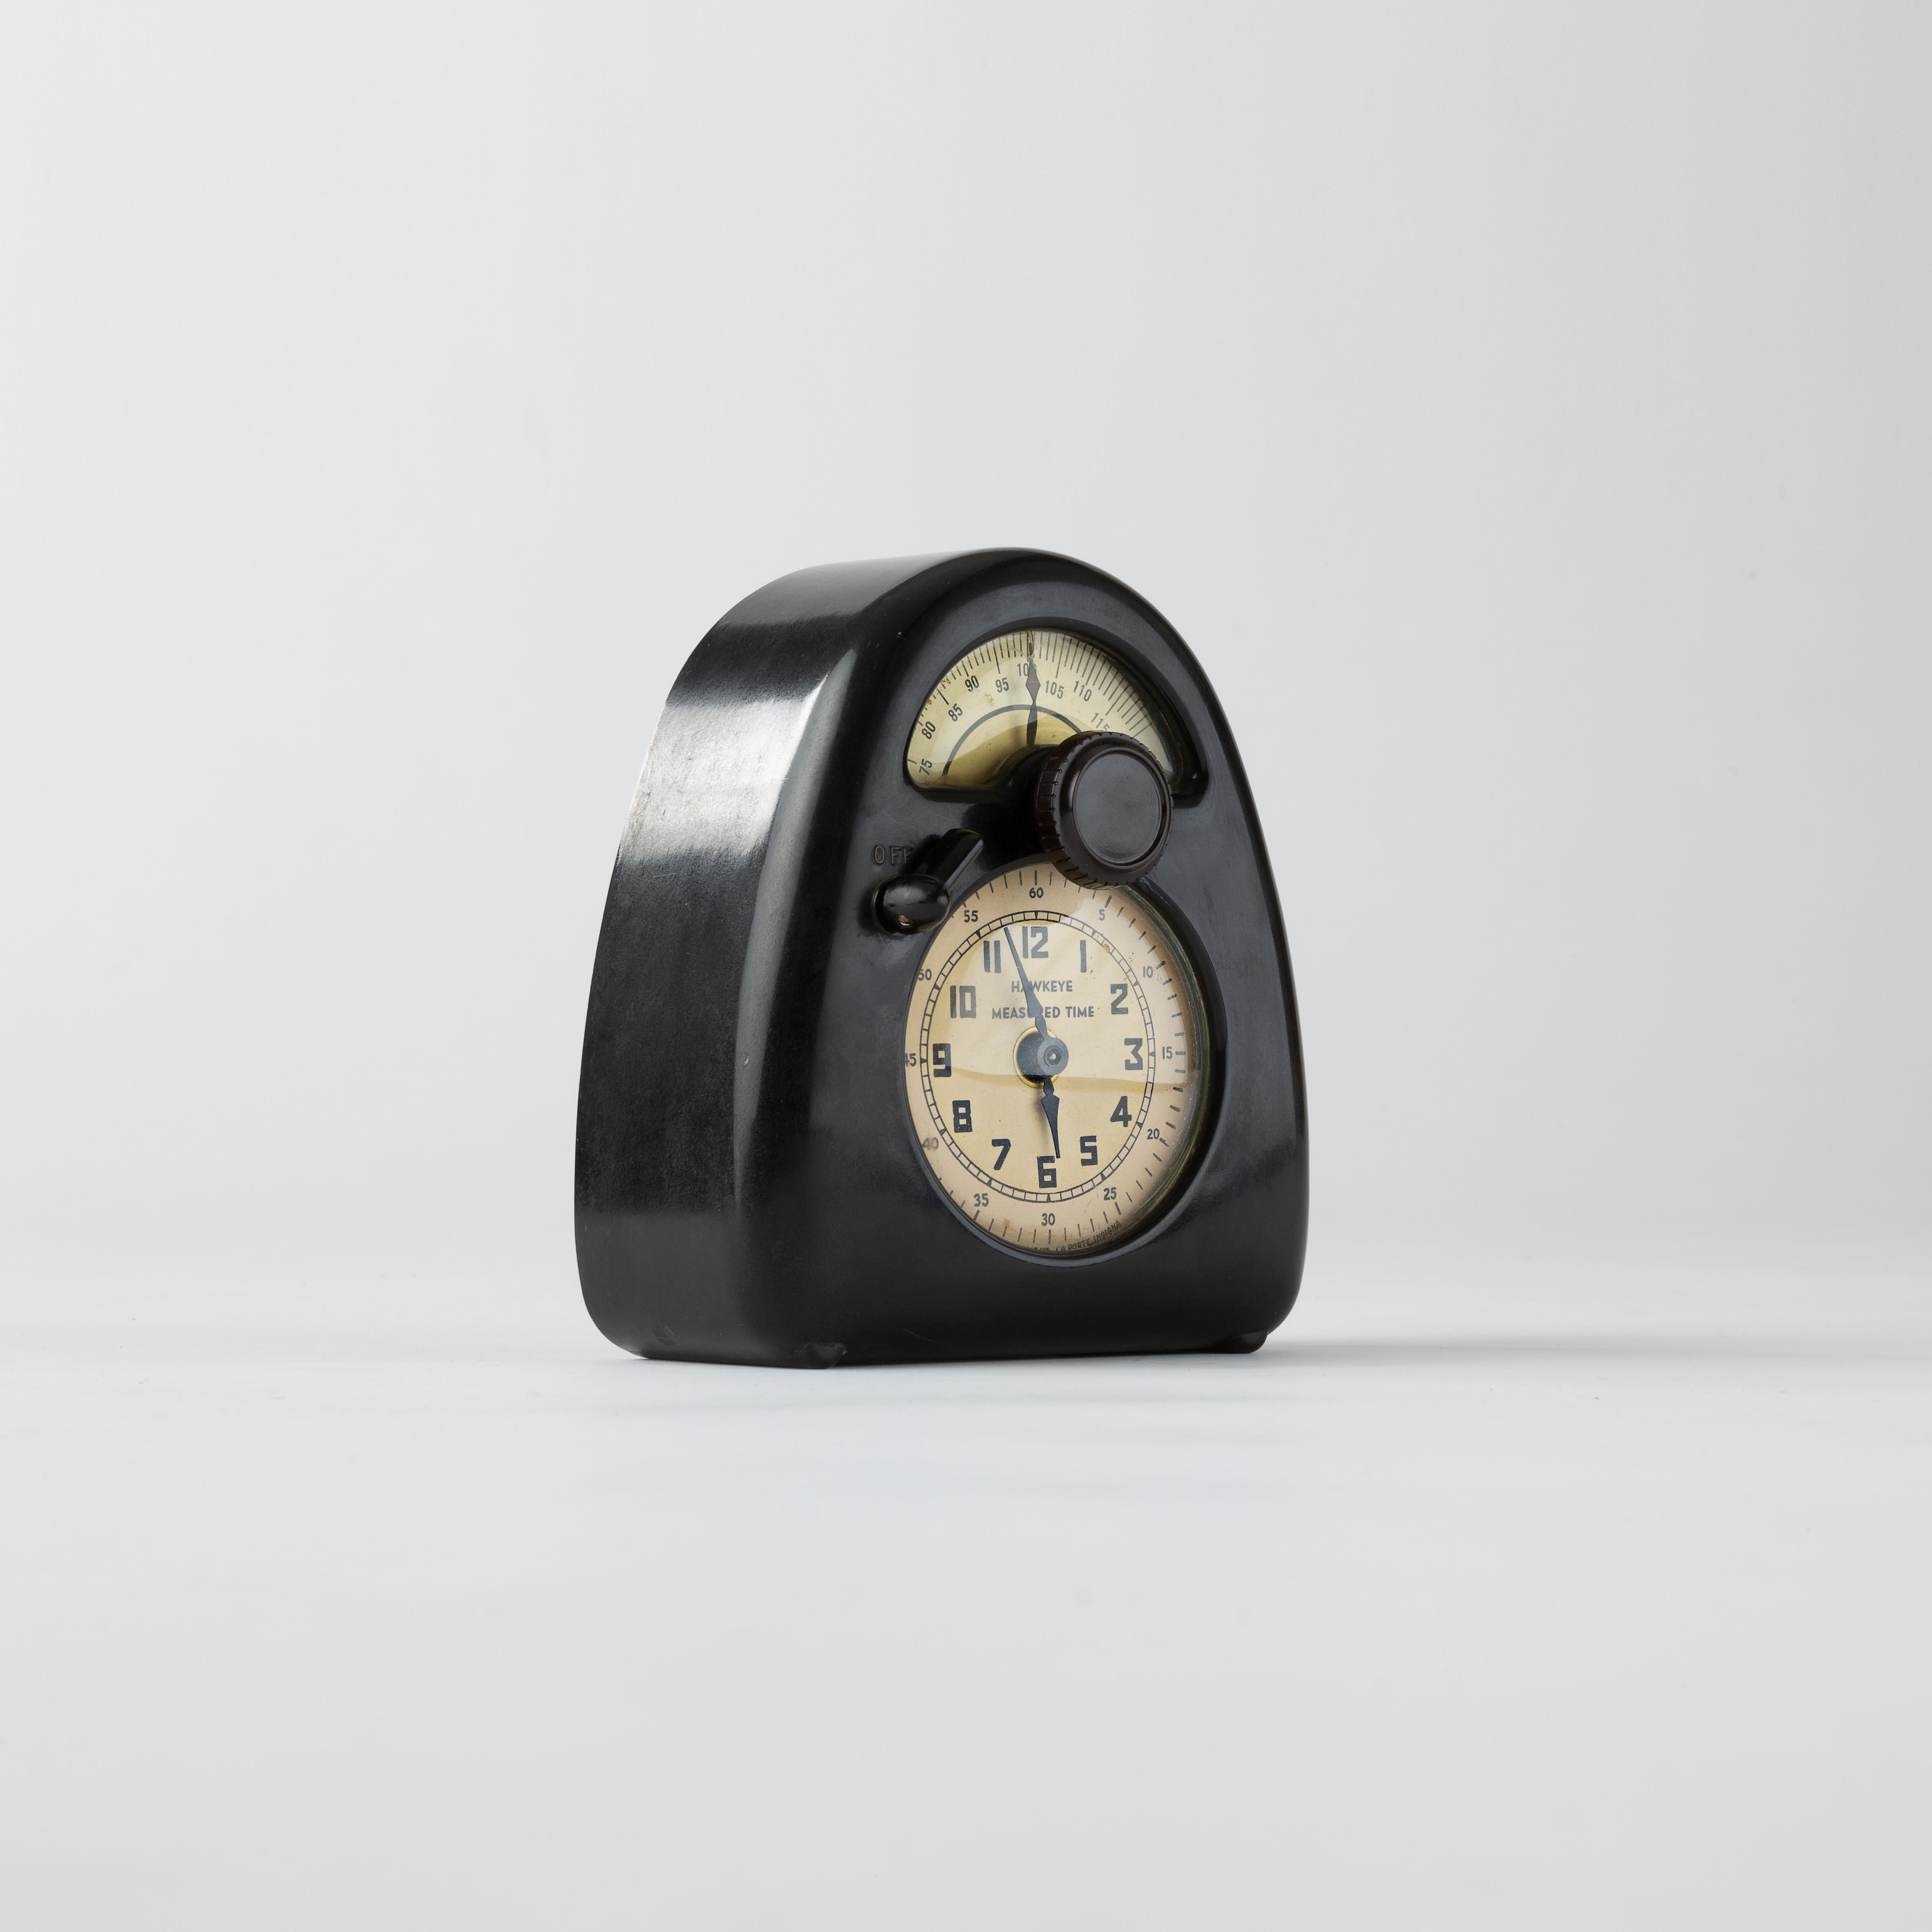 A « Measured Time » clock & kitchen timer by Isamu Noguchi, in bakelite, metal, enameled metal and printed paper, manufactured by Stevenson Manufacturing Company, La Porte, Indiana, United States. Reverse with the editor’s metal label. Model